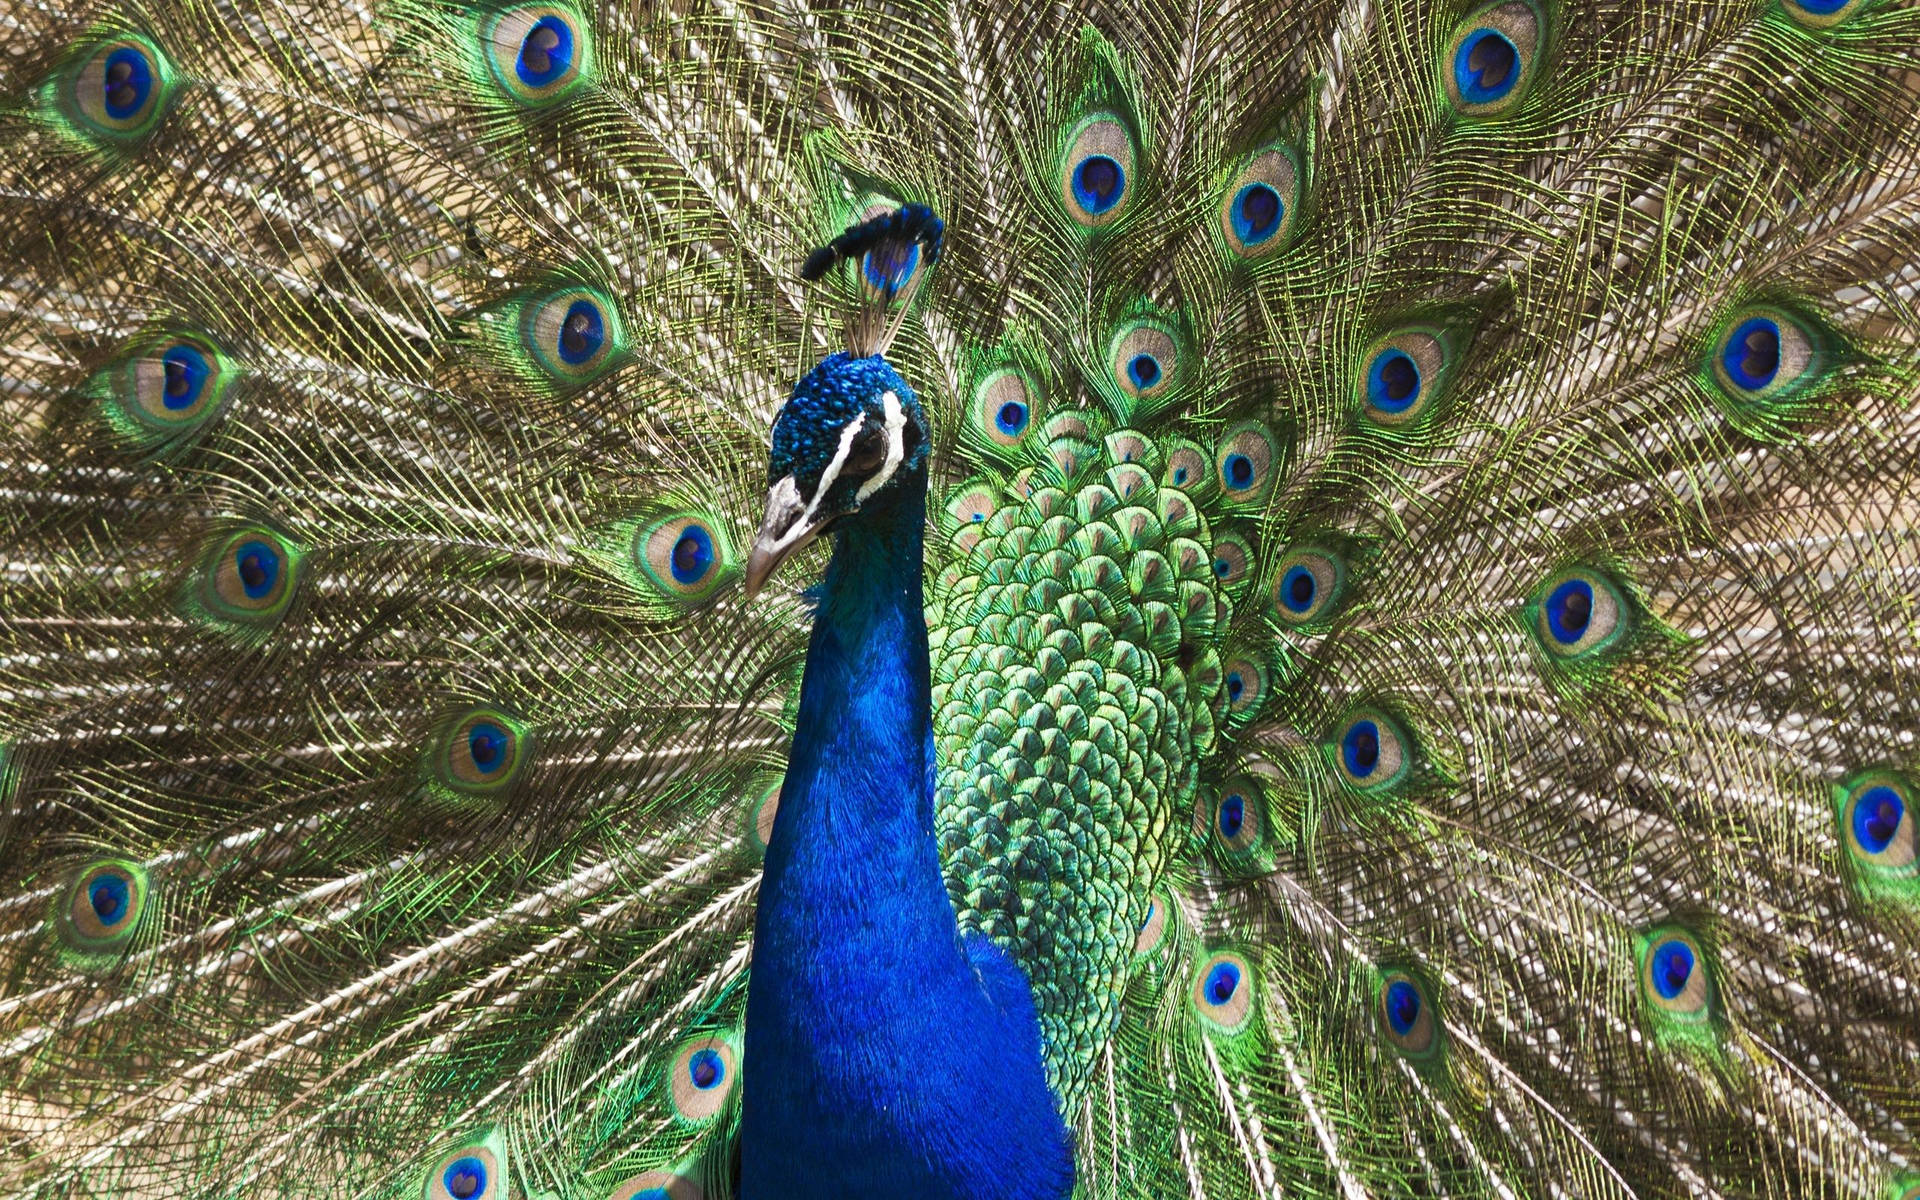 "The Unique Beauty of a Peacock's Tail Pattern" Wallpaper